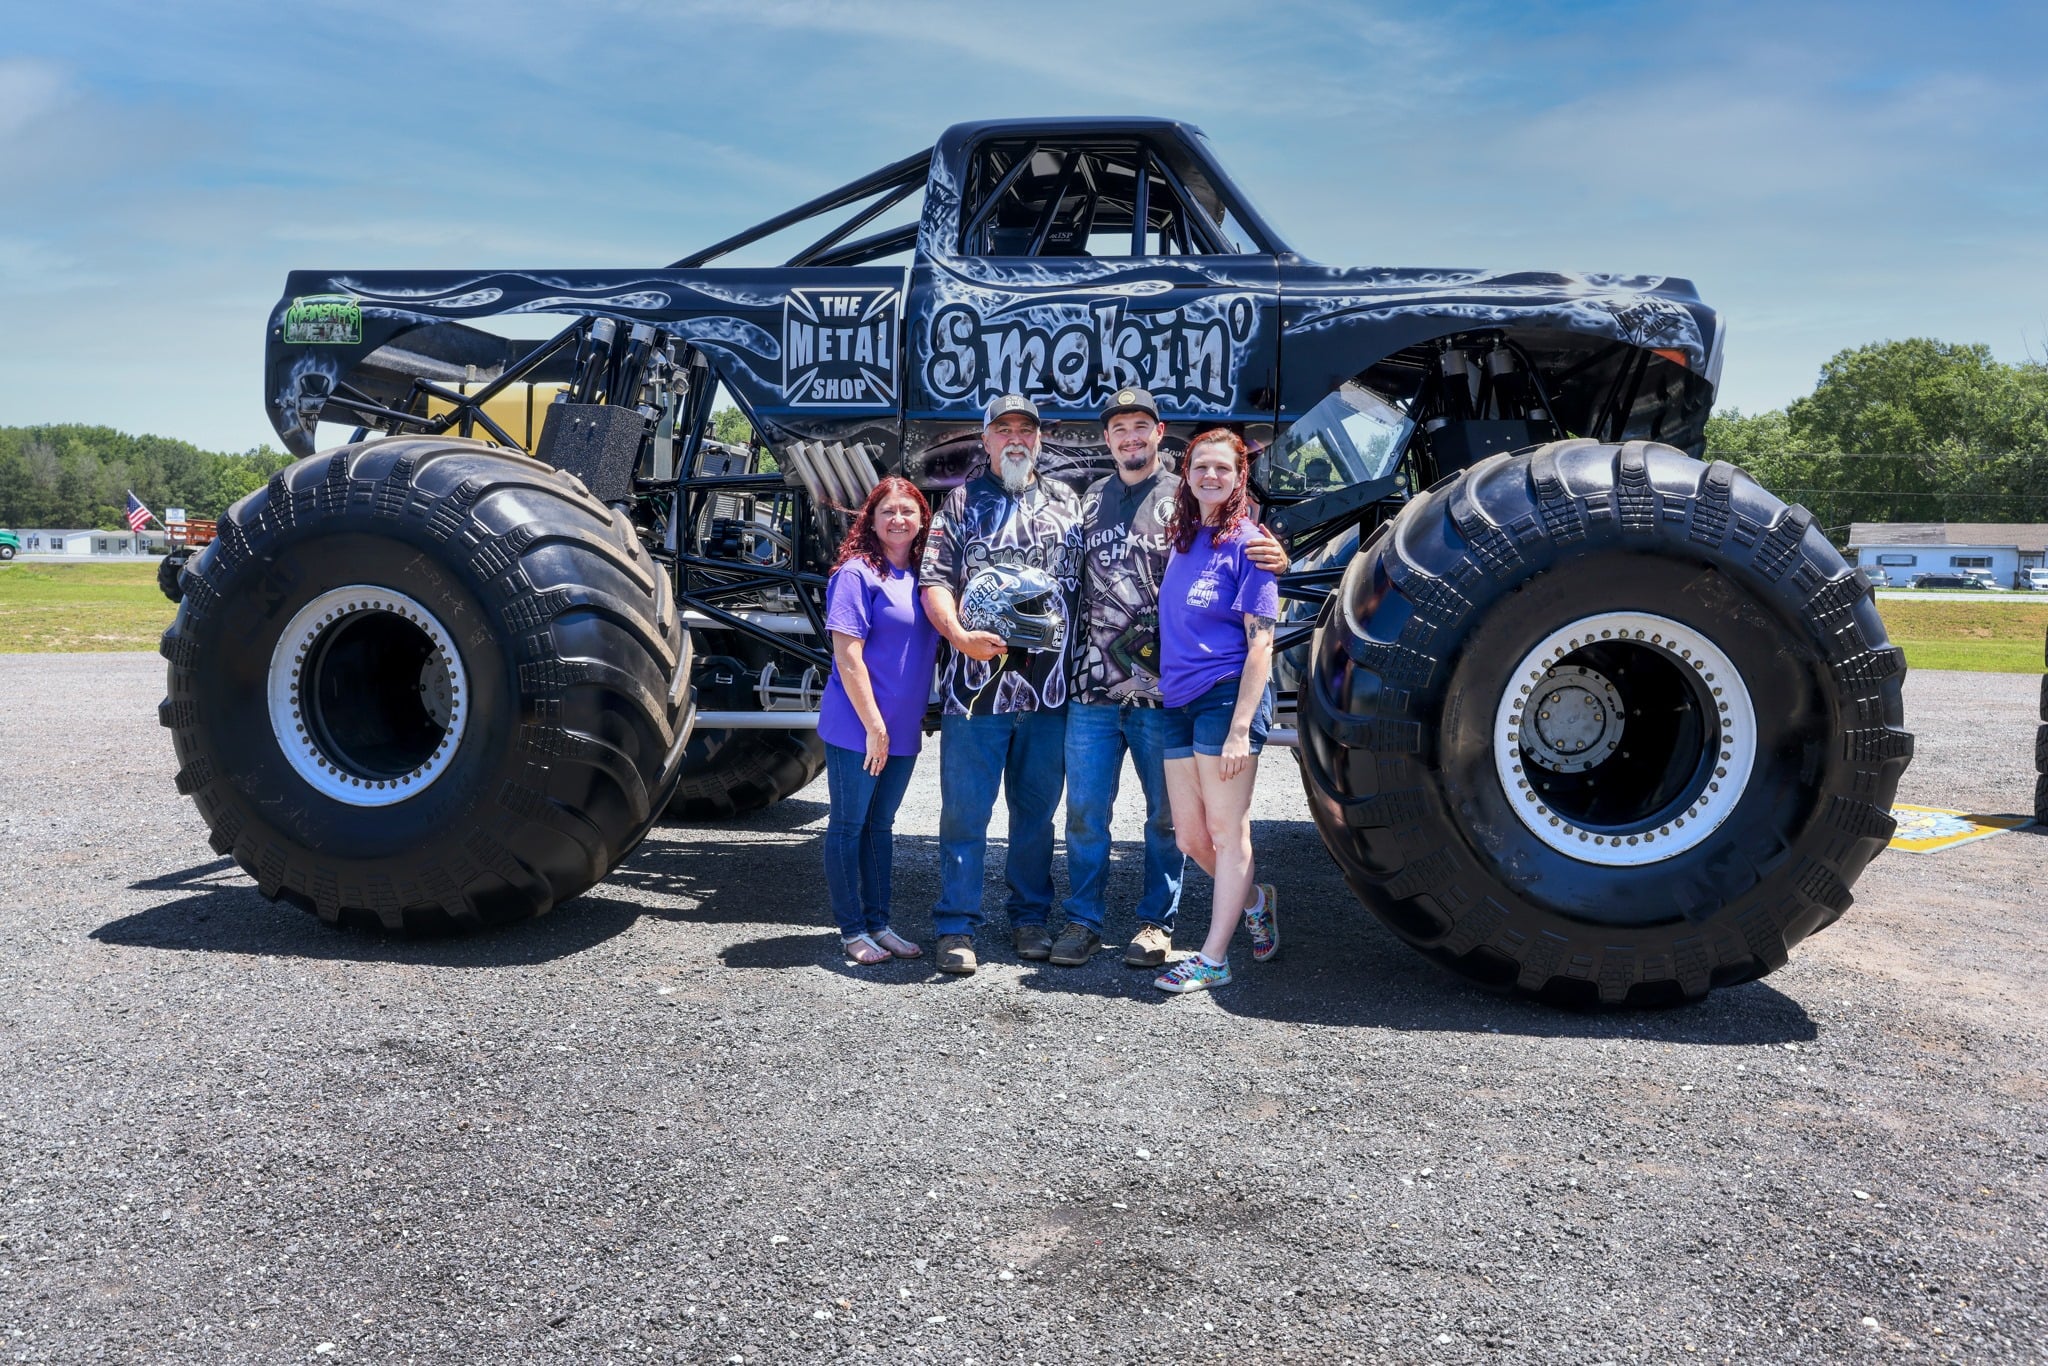 No Limits! Monster Trucks & Thrill Show returns to the Civic